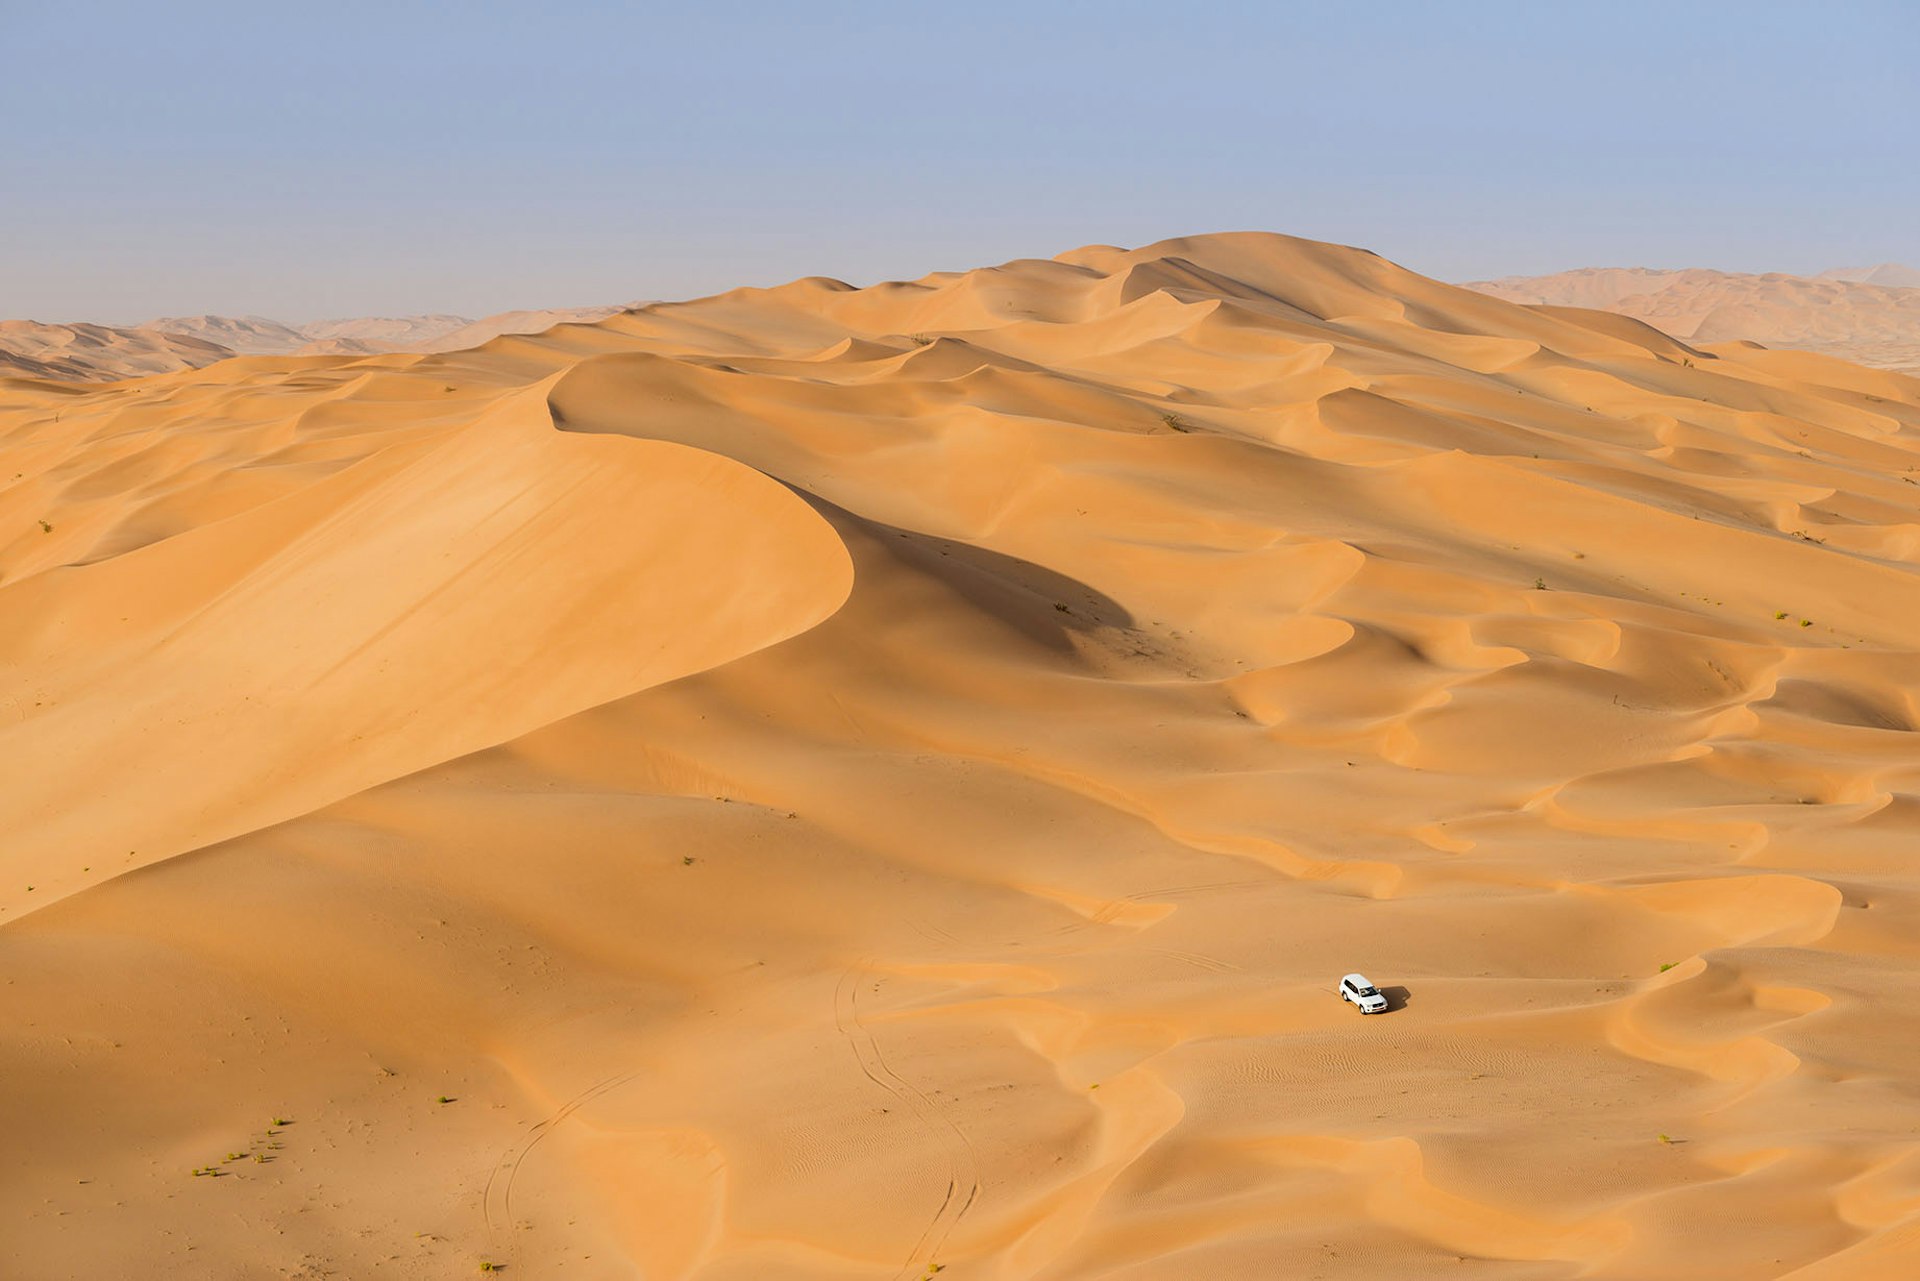 A 4x4 takes on the desert sands of the Empty Quarter, Oman